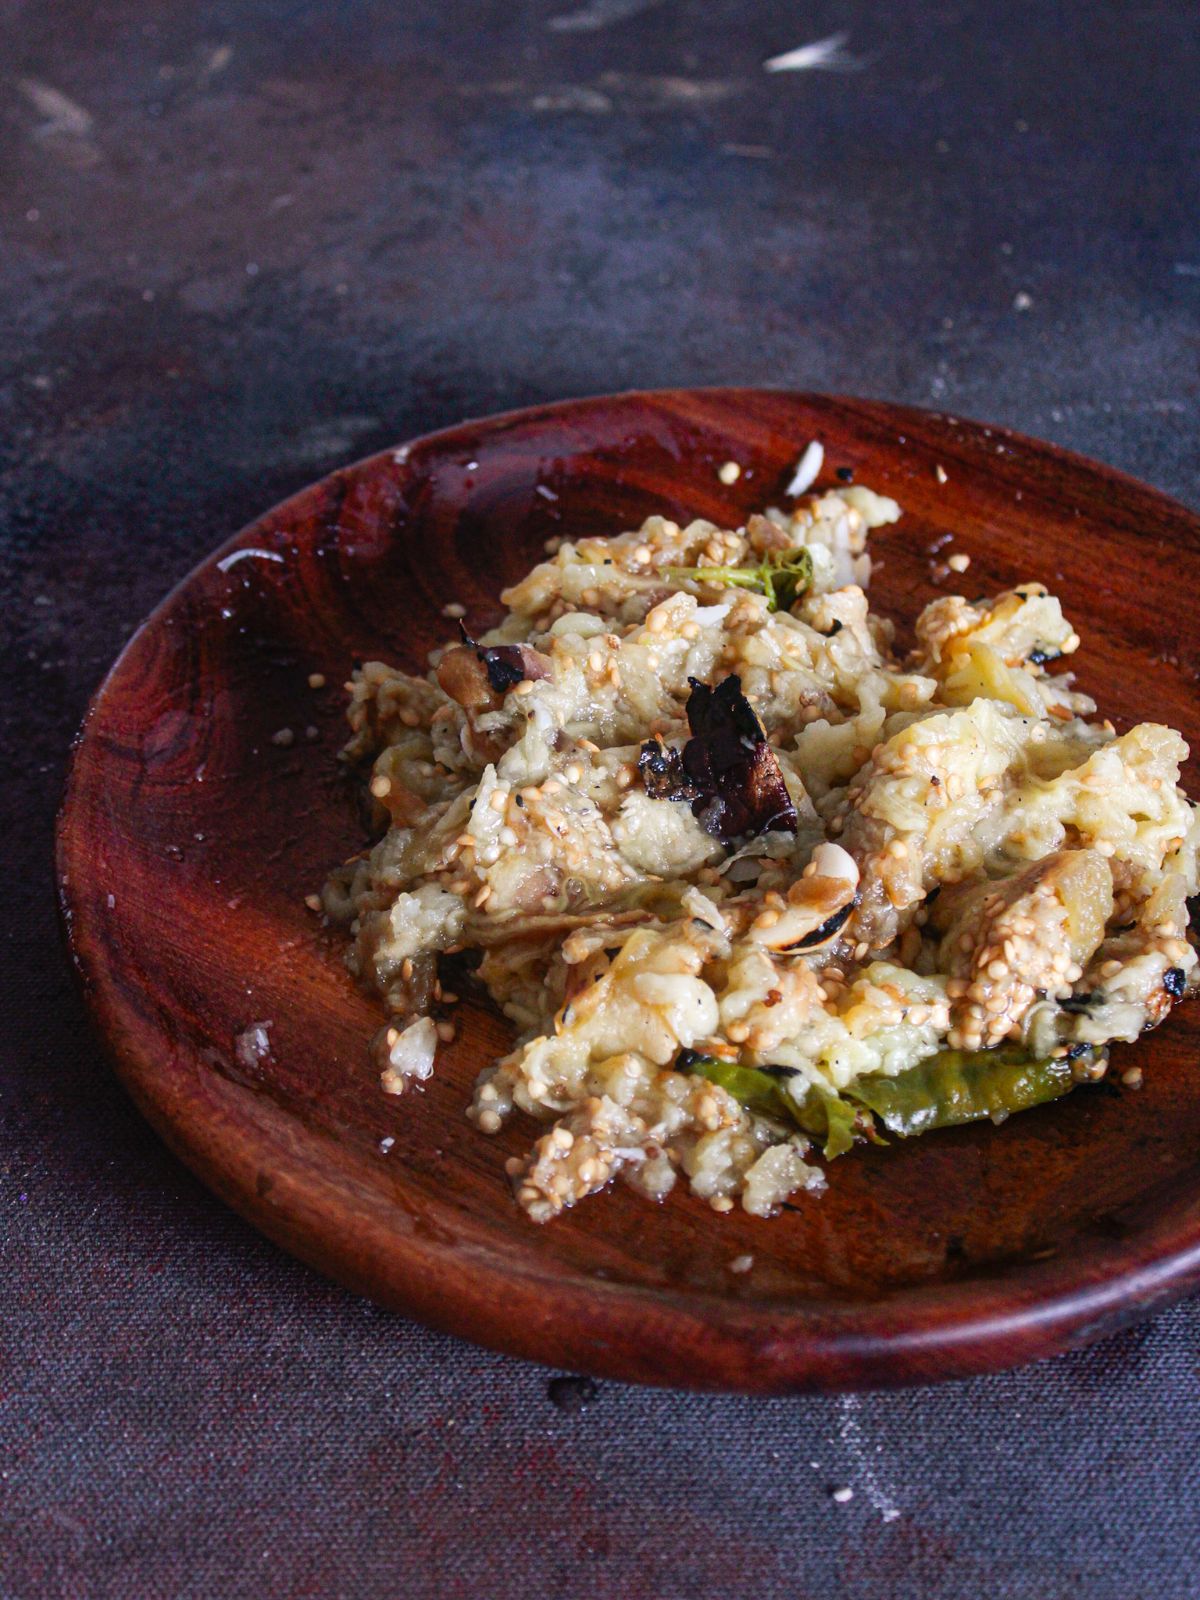 Wooden bowl with mashed eggplant and chiles